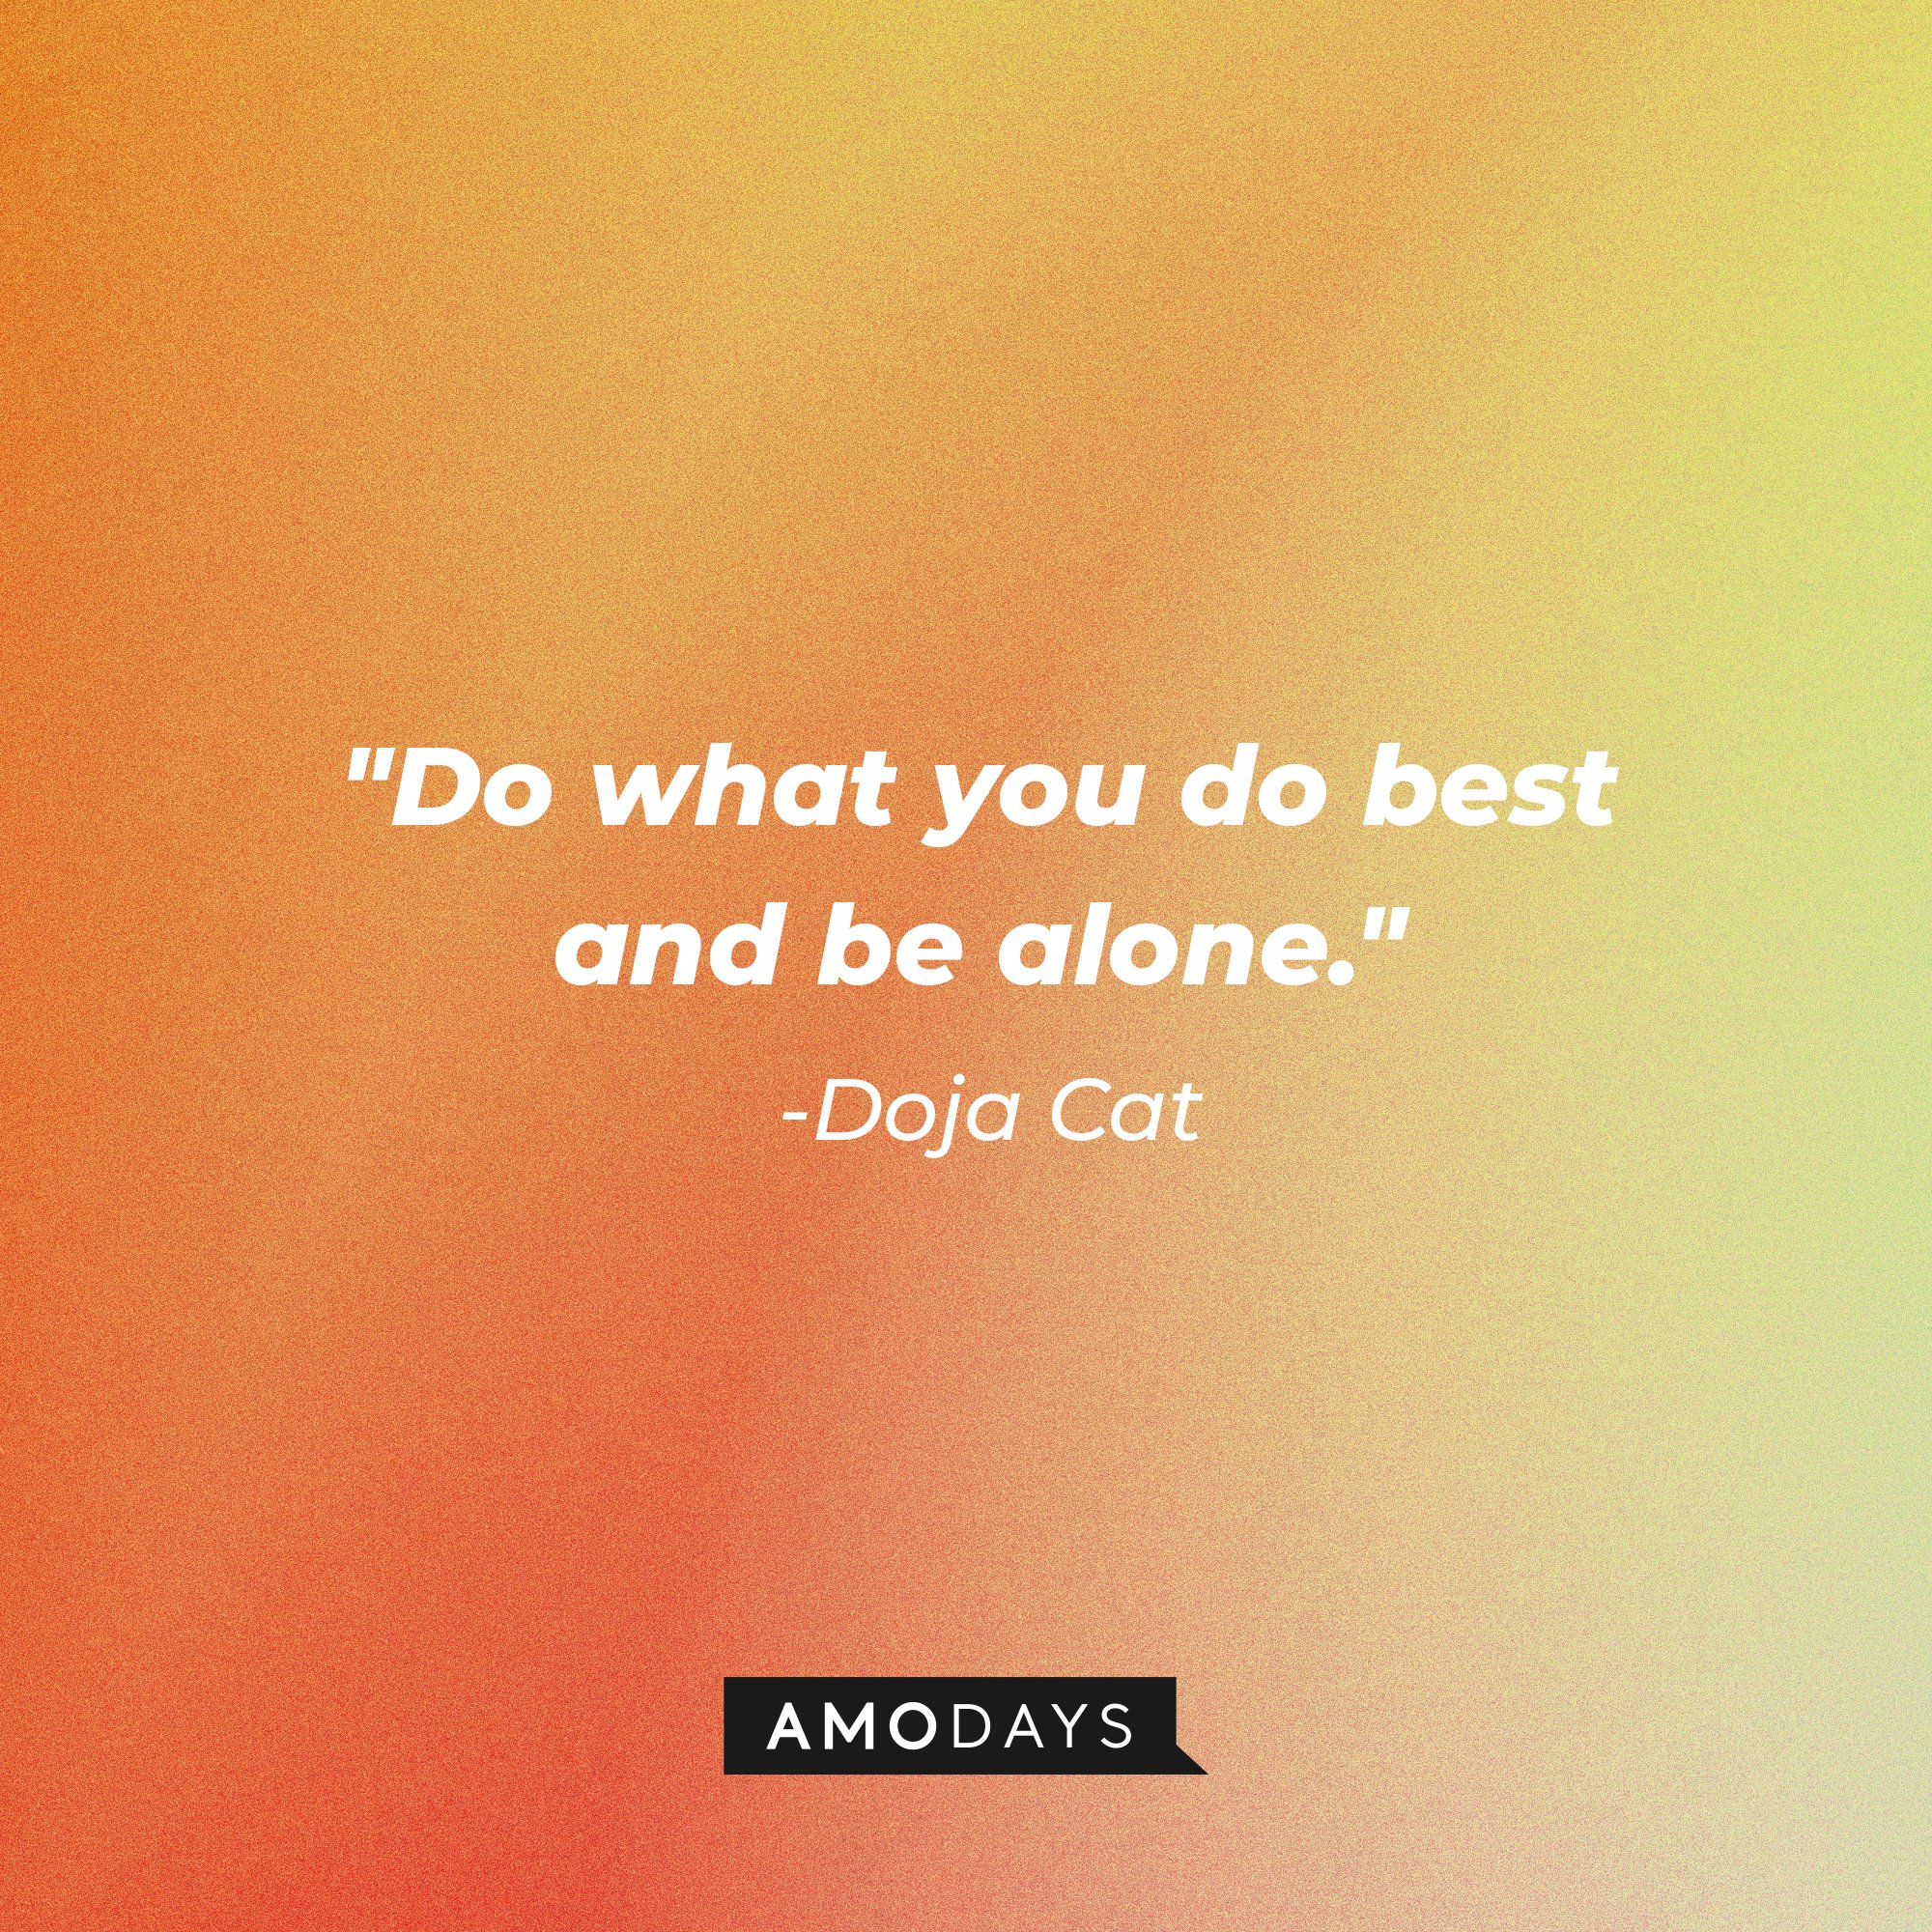 Doja Cat's quote: "Do what you do best and be alone." | Image: AmoDays